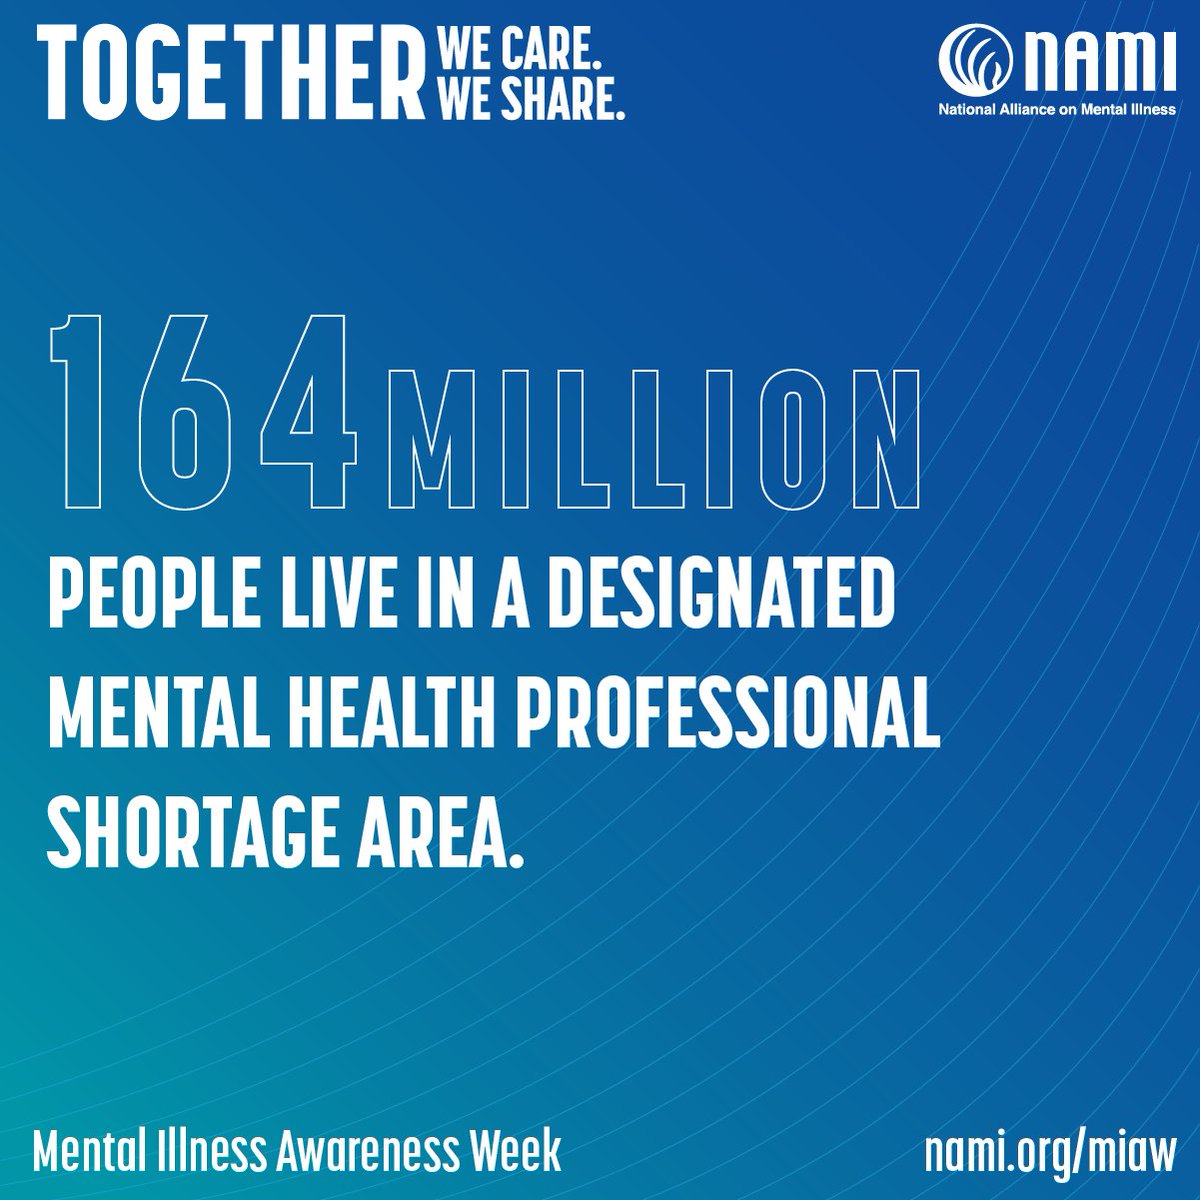 The first week in October is Mental Illness Awareness Week (#MIAW), a national effort where we raise awareness, fight discrimination, and provide support. This year's theme is “Together We Care. Together We Share,” which conveys the power of coming together in community.